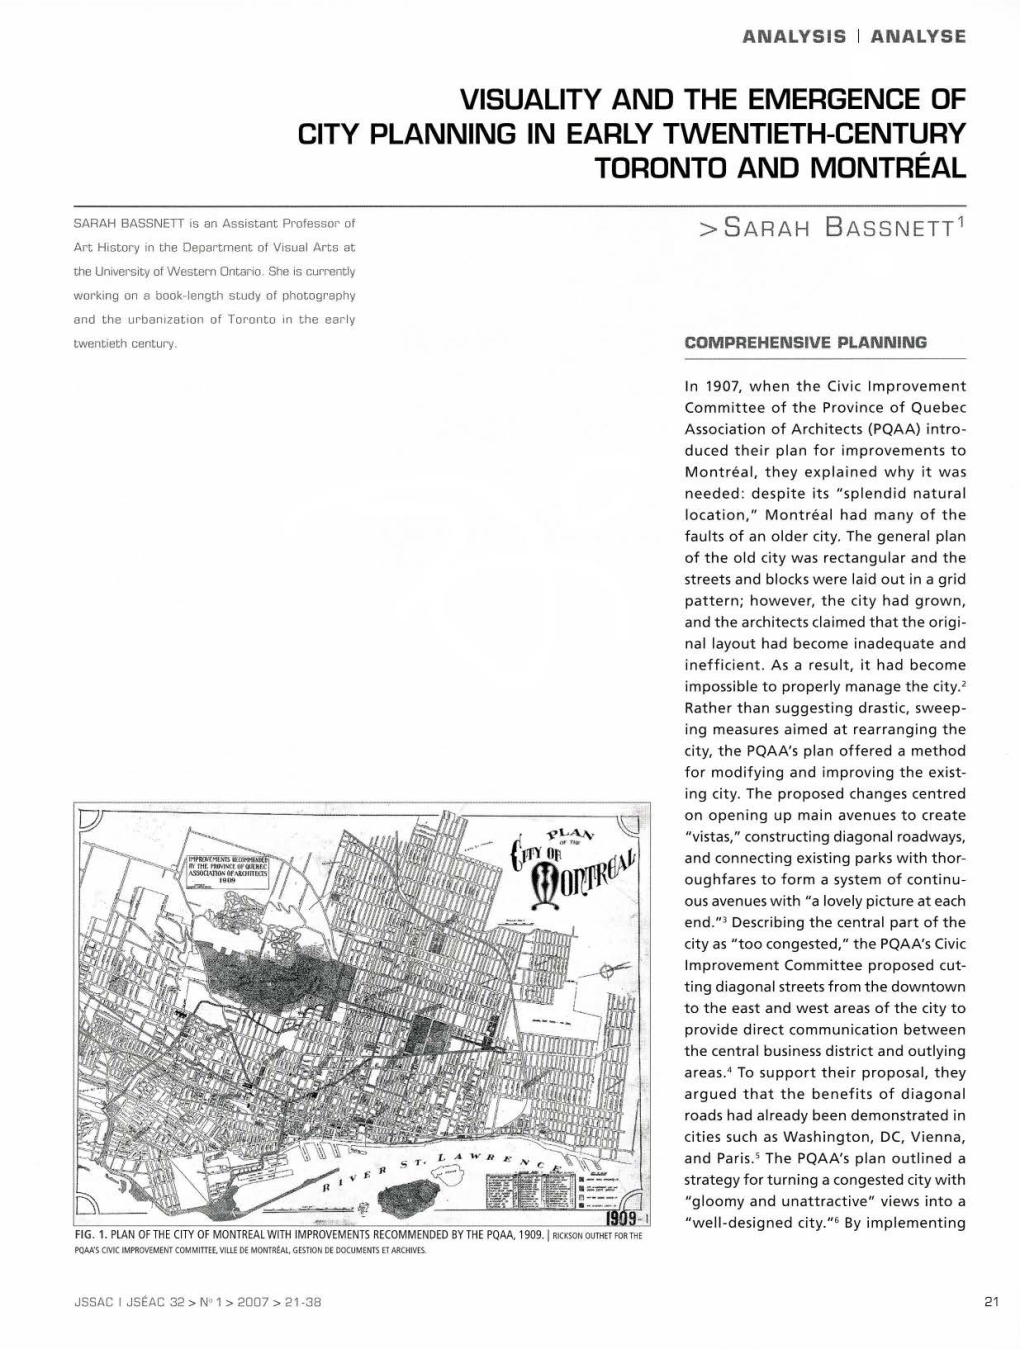 Visuality and the Emergence of City Planning in Early Twentieth-Century Toronto and Montreal